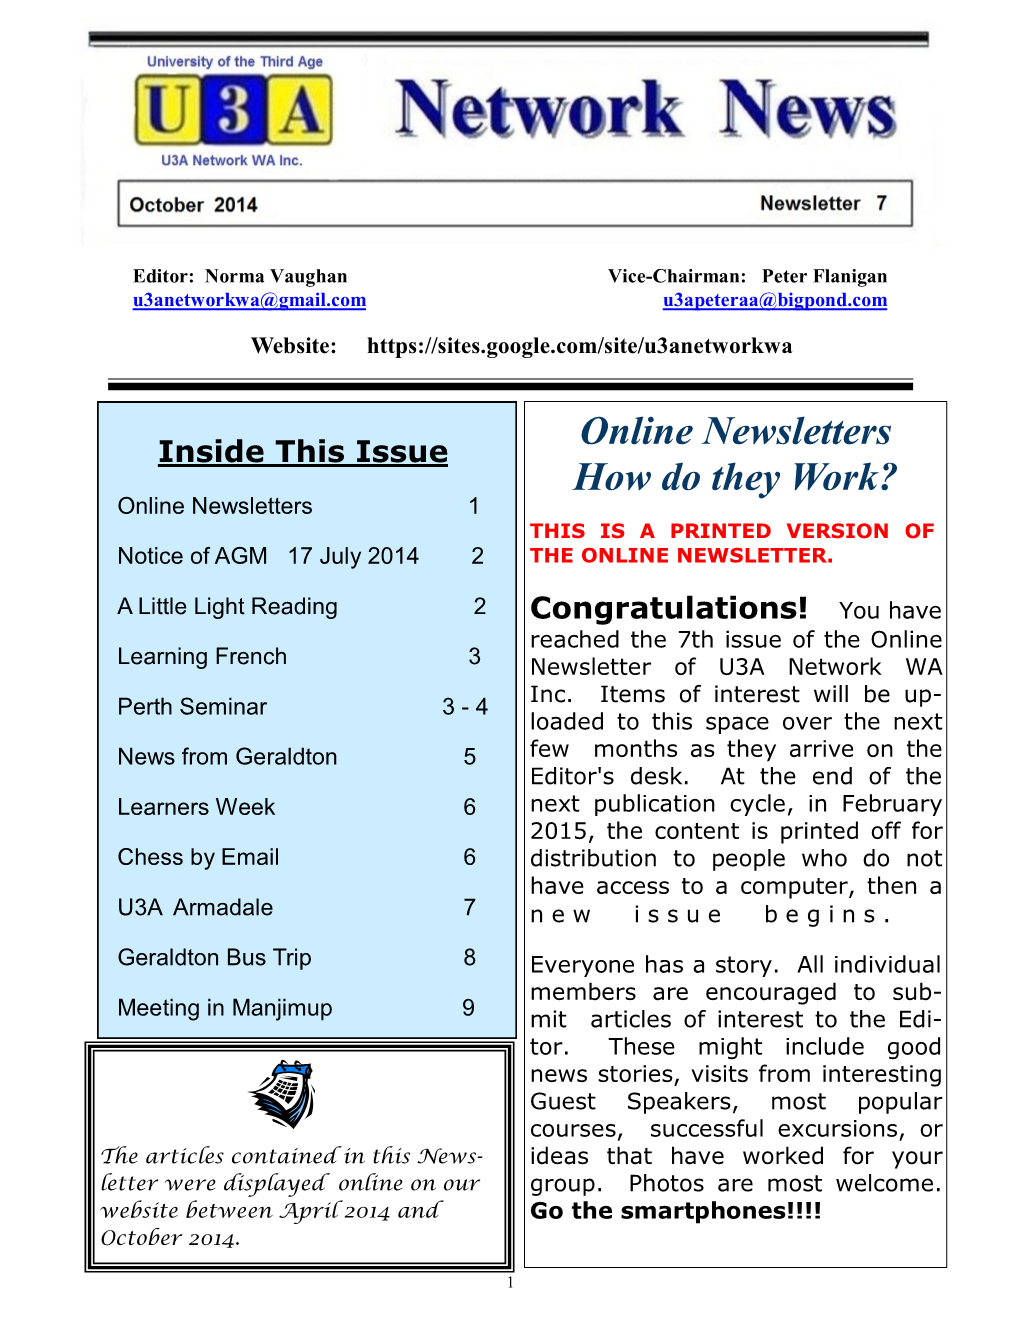 Online Newsletters How Do They Work?